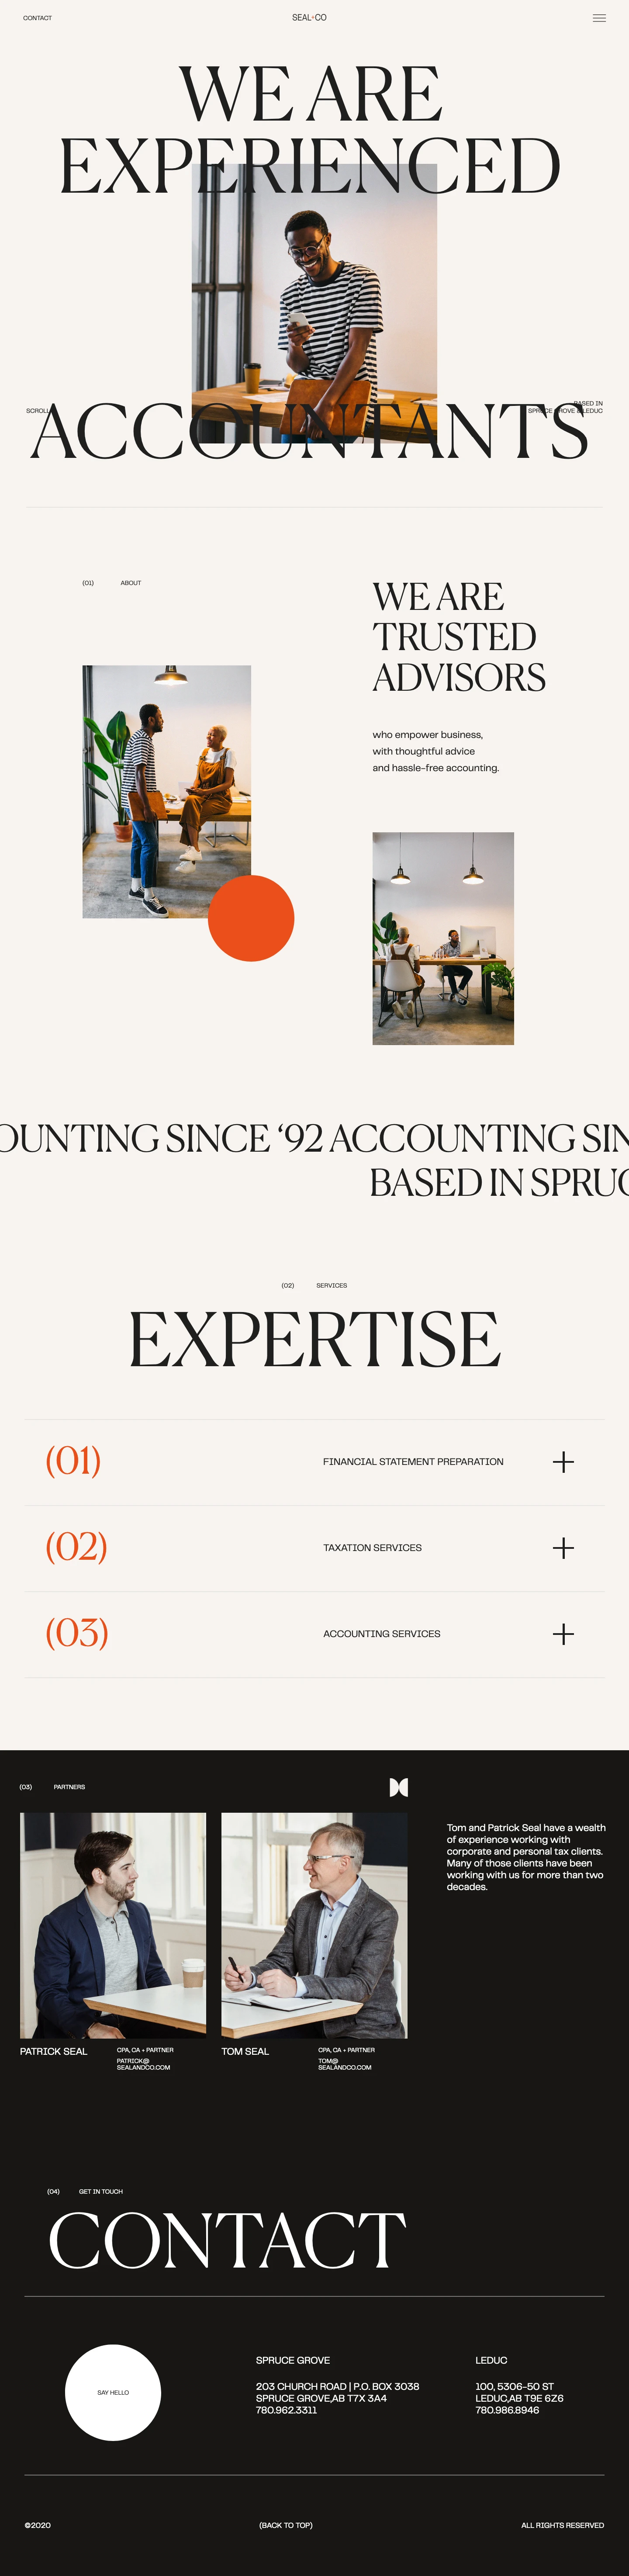 SEAL+CO Landing Page Example: Seal+Co Chartered Professional Accountants is a Full-Service Accounting firm based in Spruce Grove, AB. Led by partners Tom & Patrick Seal, Seal+Co provides quality business and tax advice to a select group of clients.